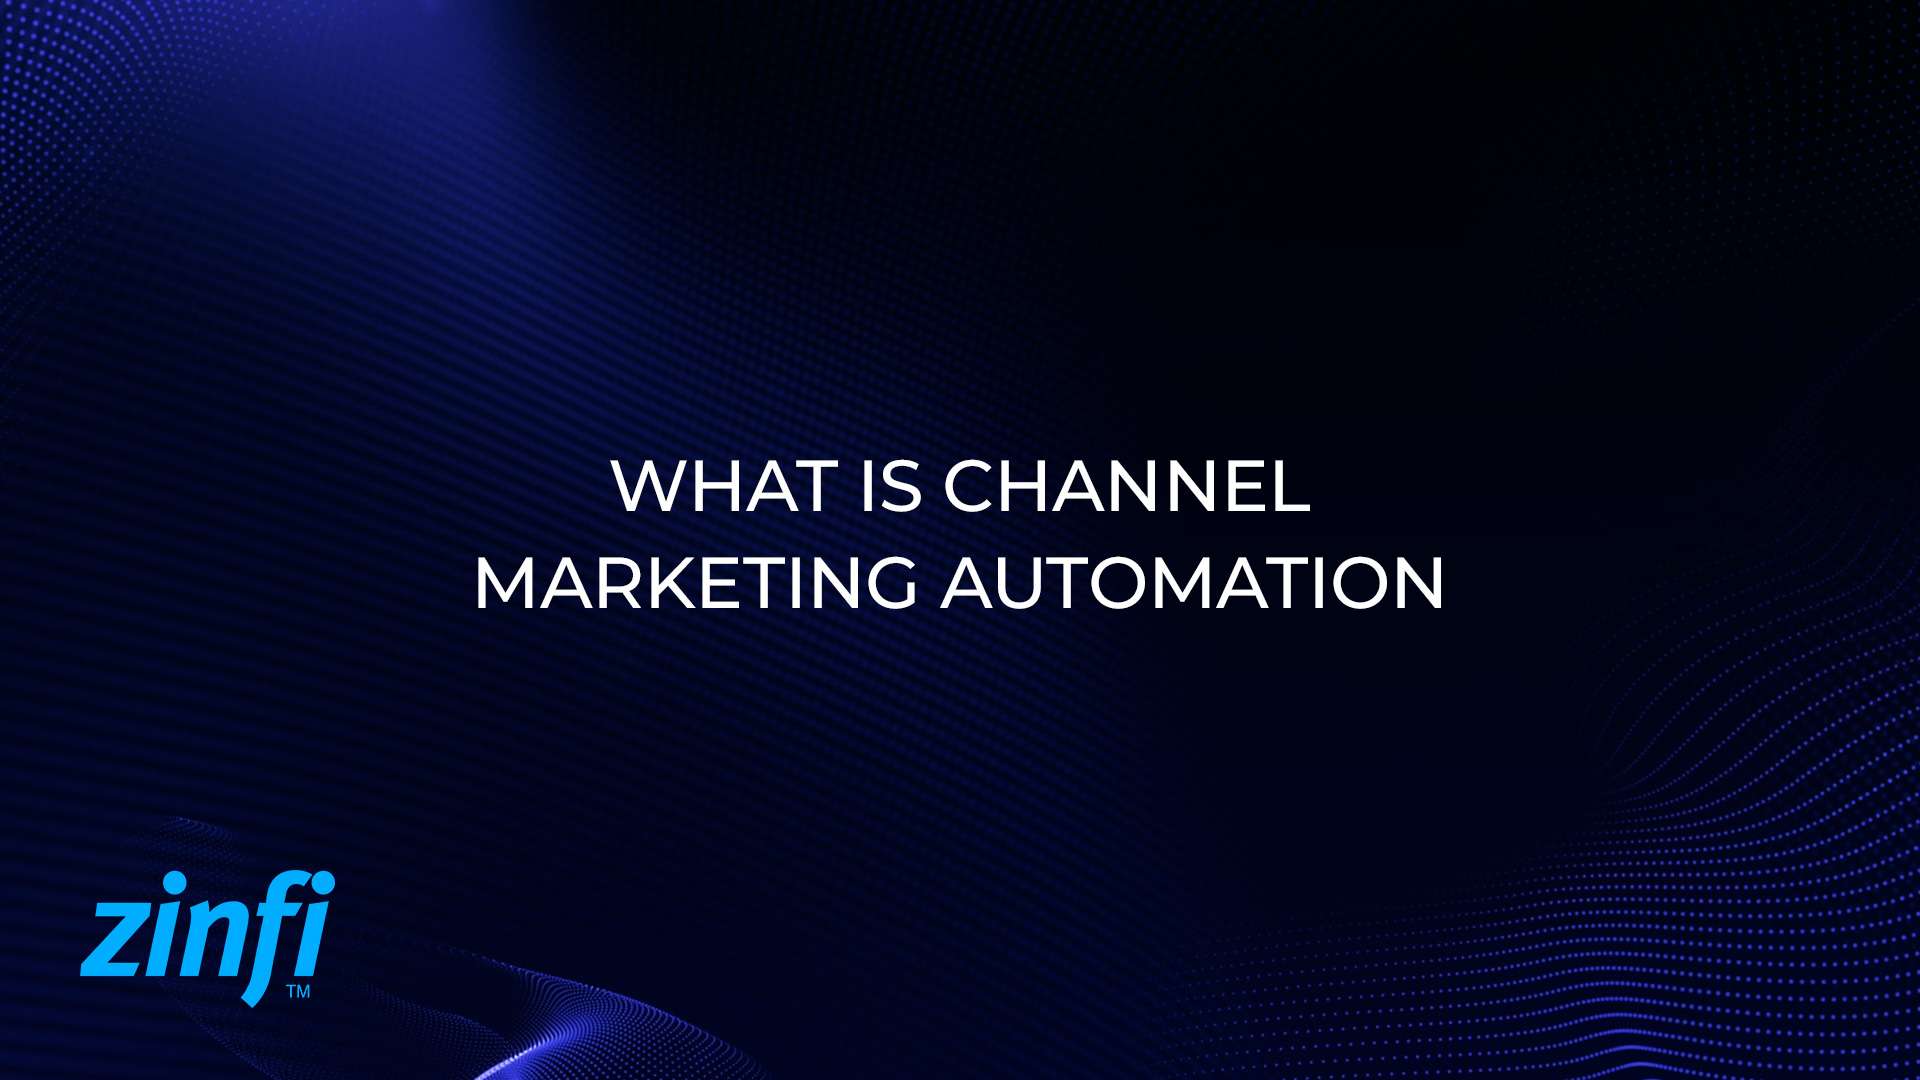 Overview of Channel Marketing Automation